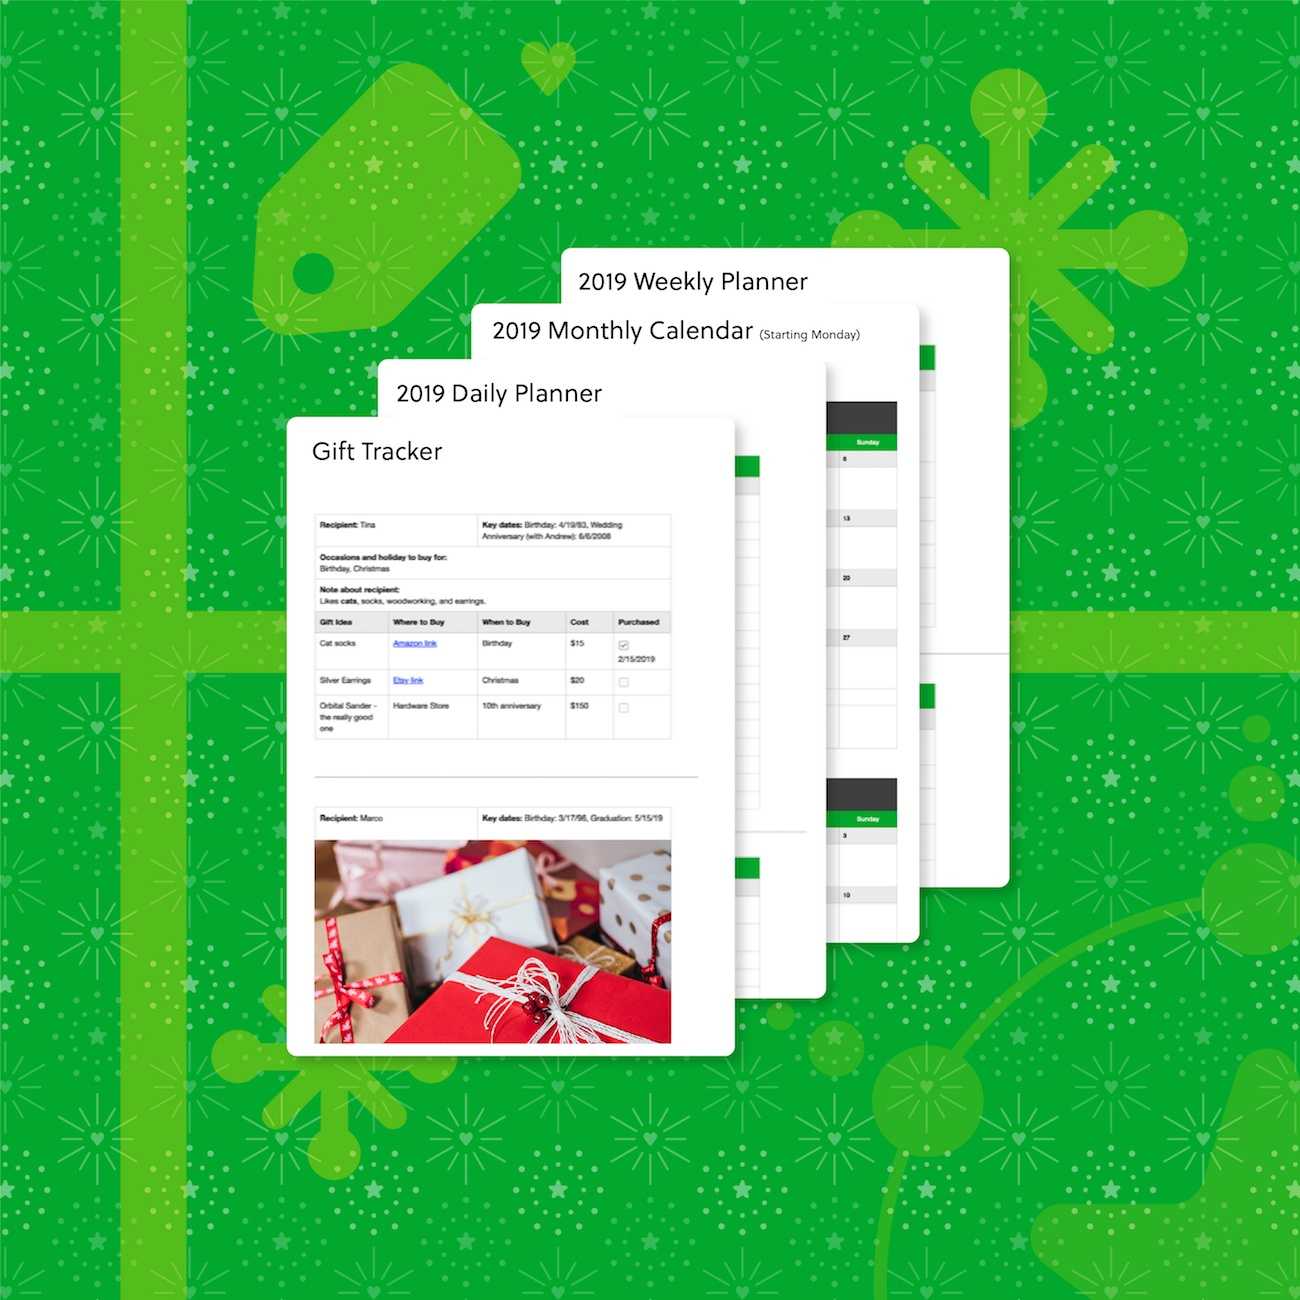 Templates, The Hidden Gem Of Evernote | Evernote | Evernote Blog Intended For Evernote Meeting Notes Template